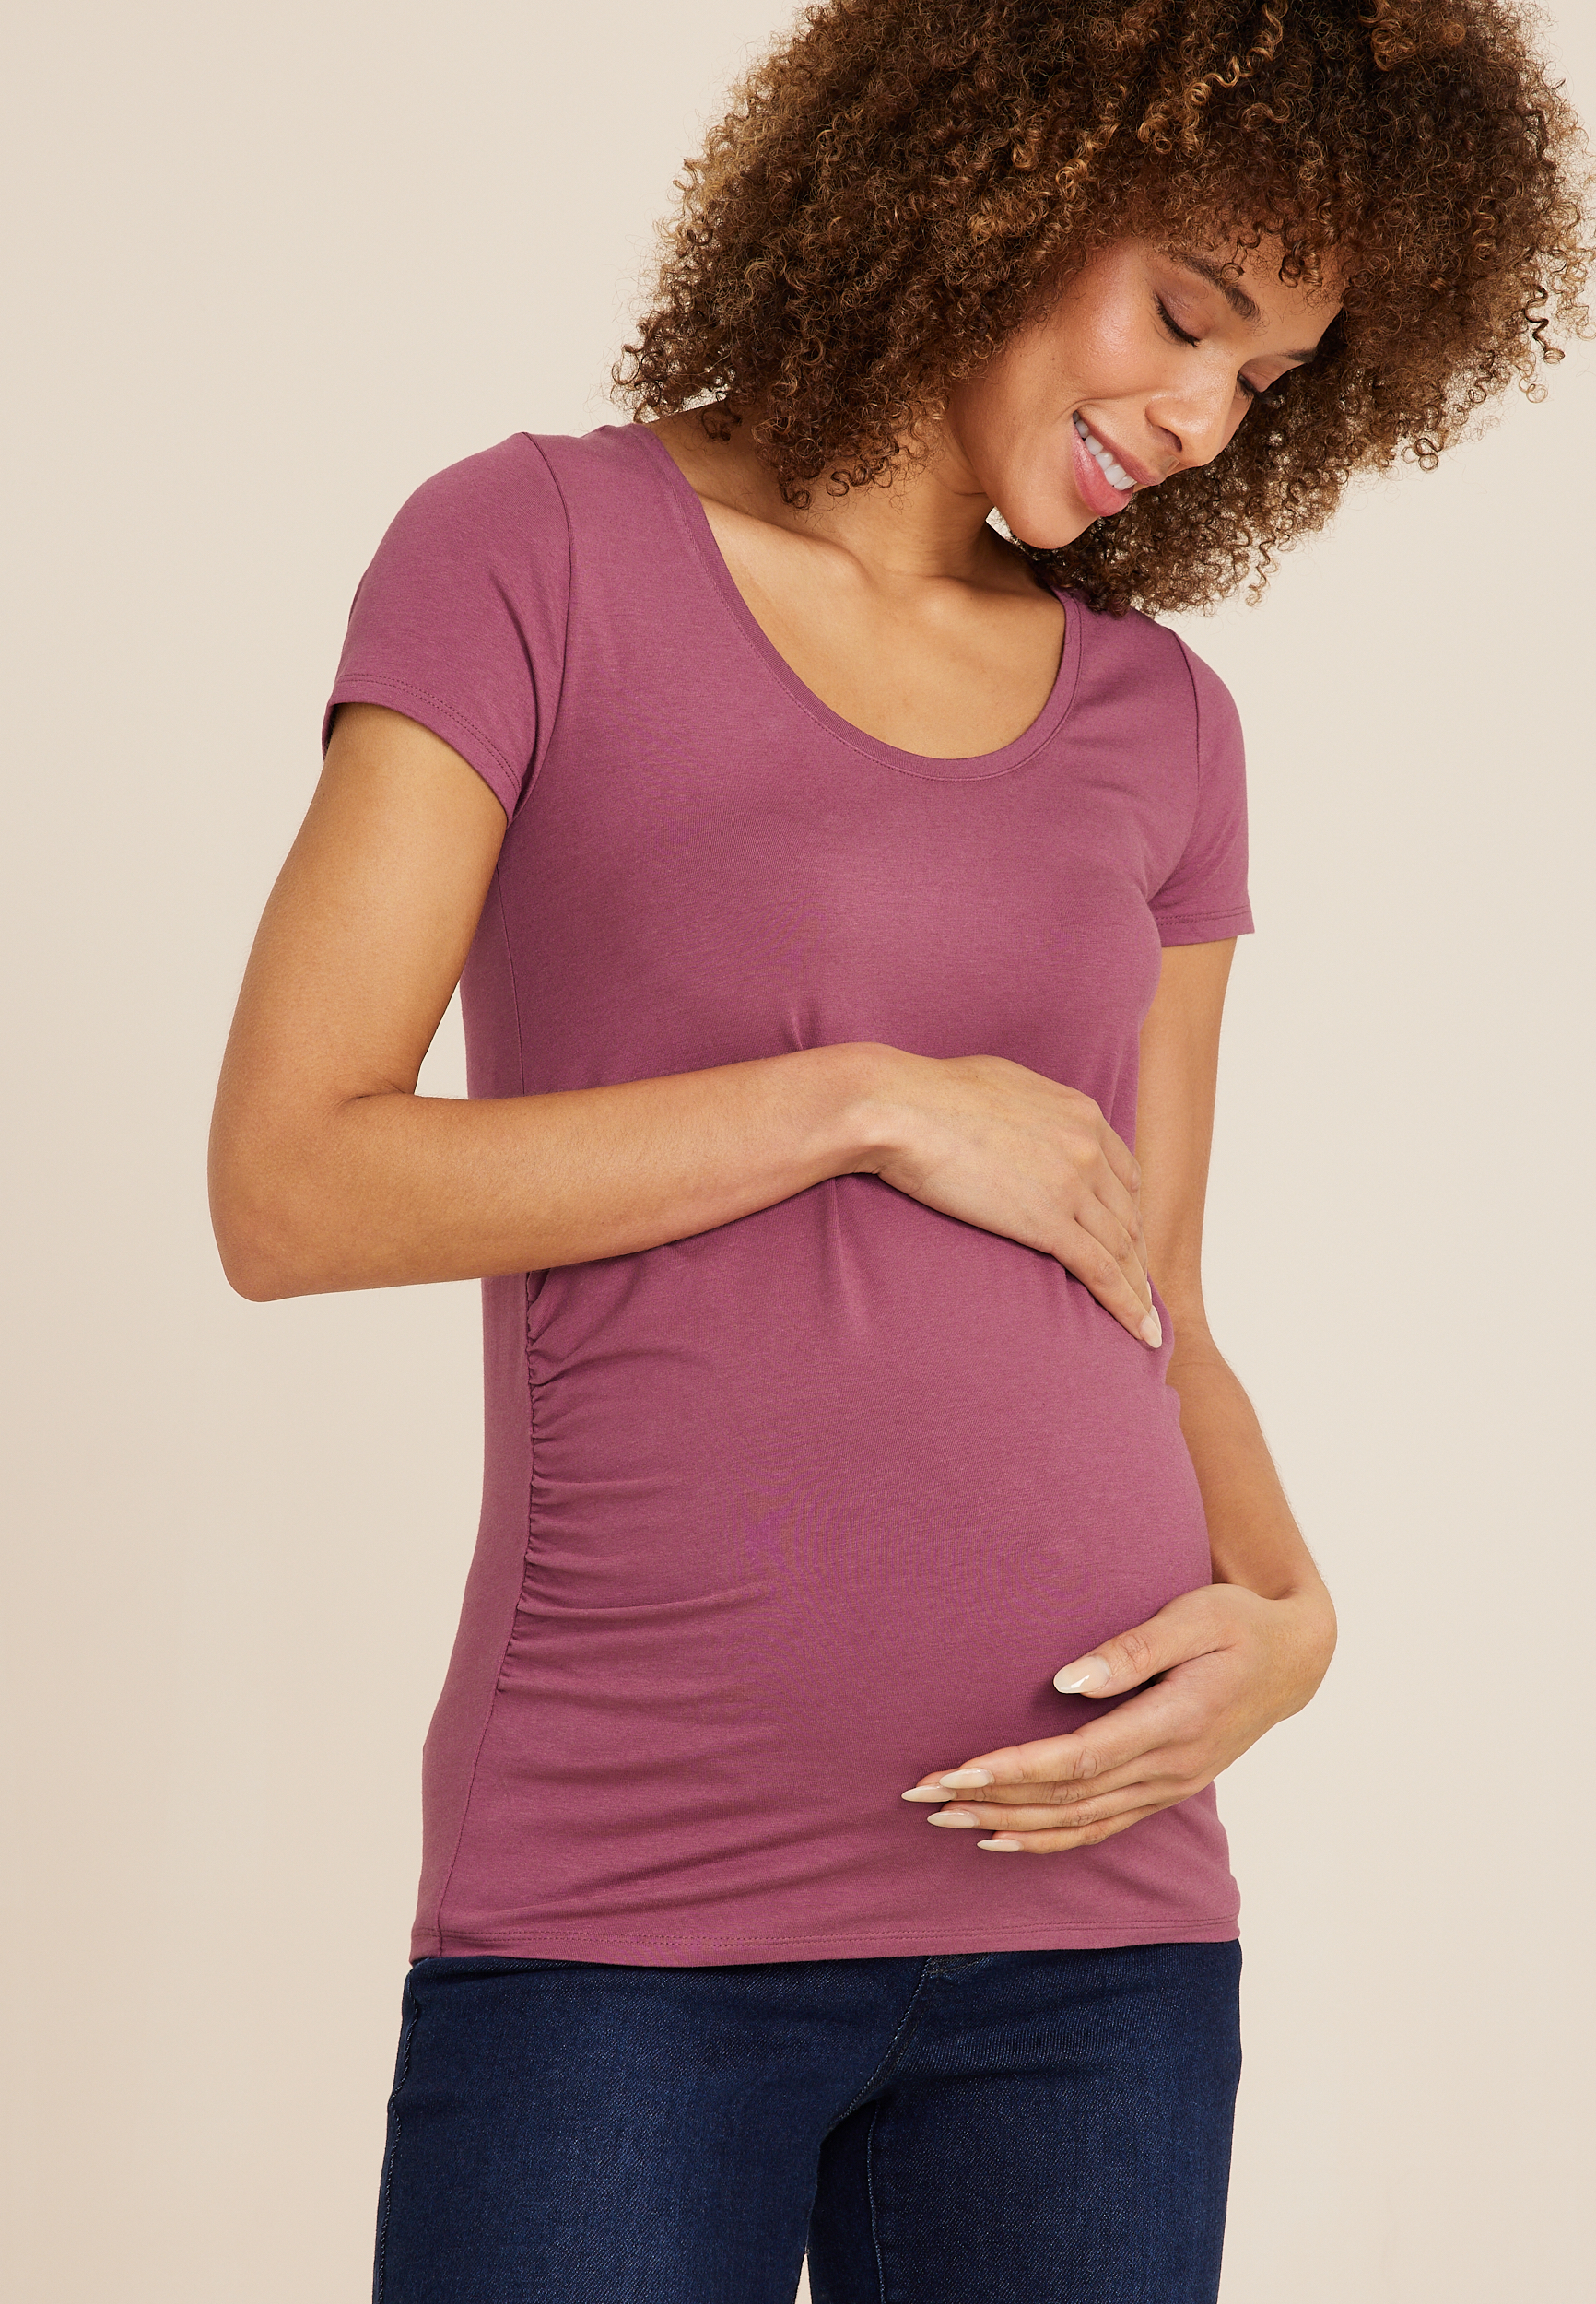 Shop Maternity Clothing, New Arrivals